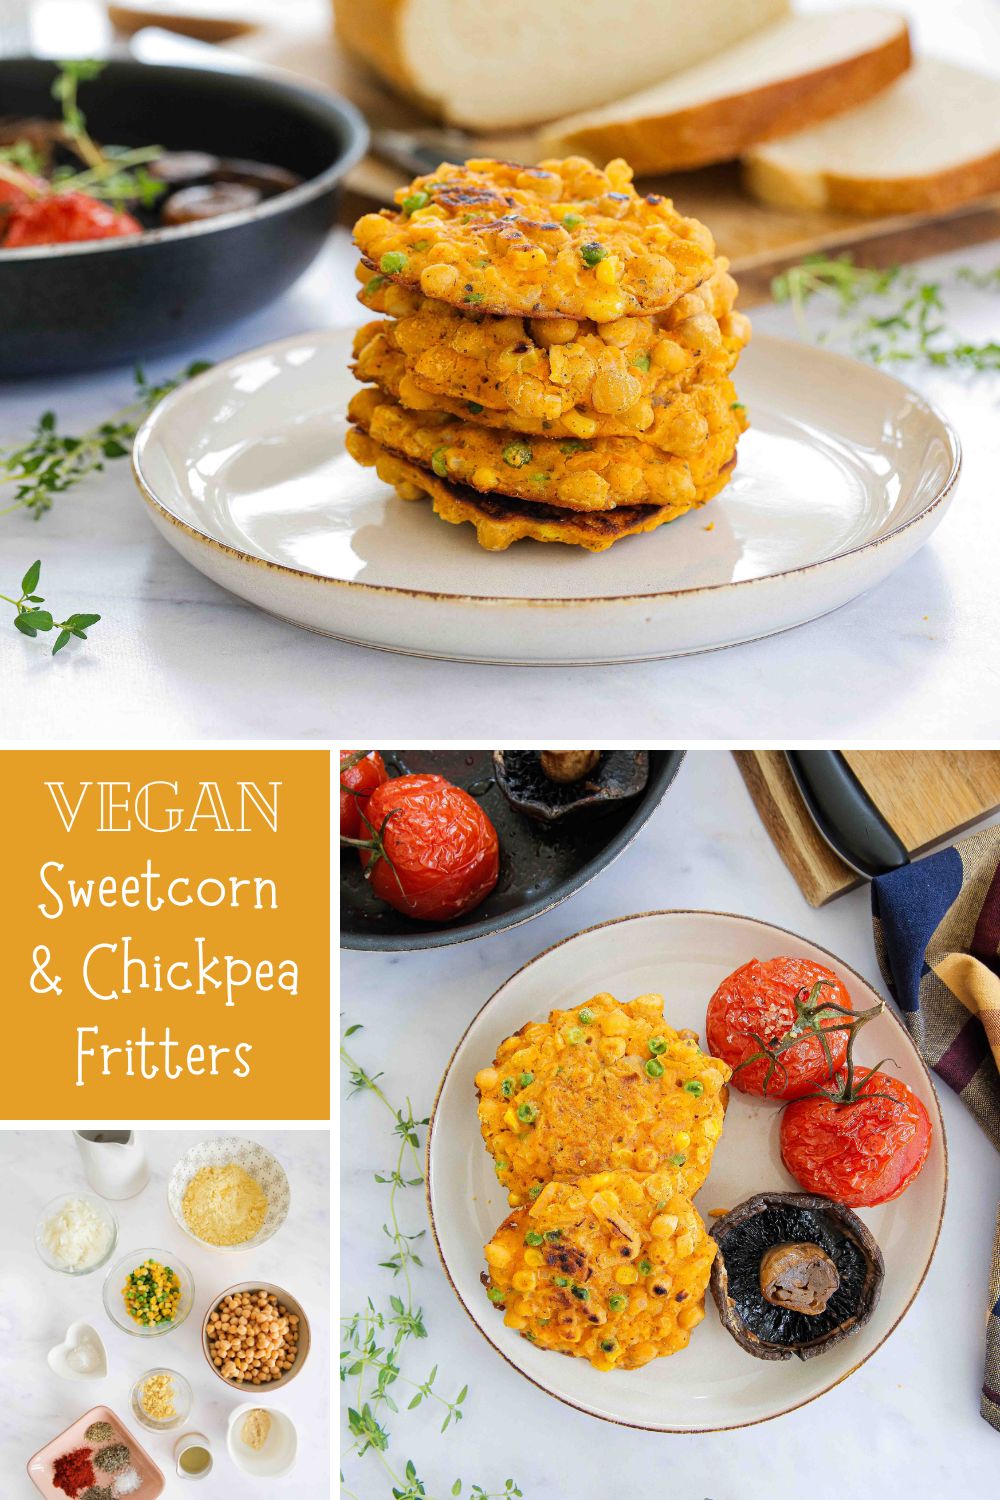 Super simple and healthy sweetcorn fritters, packed with flavour and vegan protein! Just one bowl and one frying pan needed for a delicious lunch, brunch or side dish. Gluten free too! Recipe on thecookandhim.com #vegan #summerrecipes #healthydinner #summermeals #glutenfreerecipes #sweetcornfritters